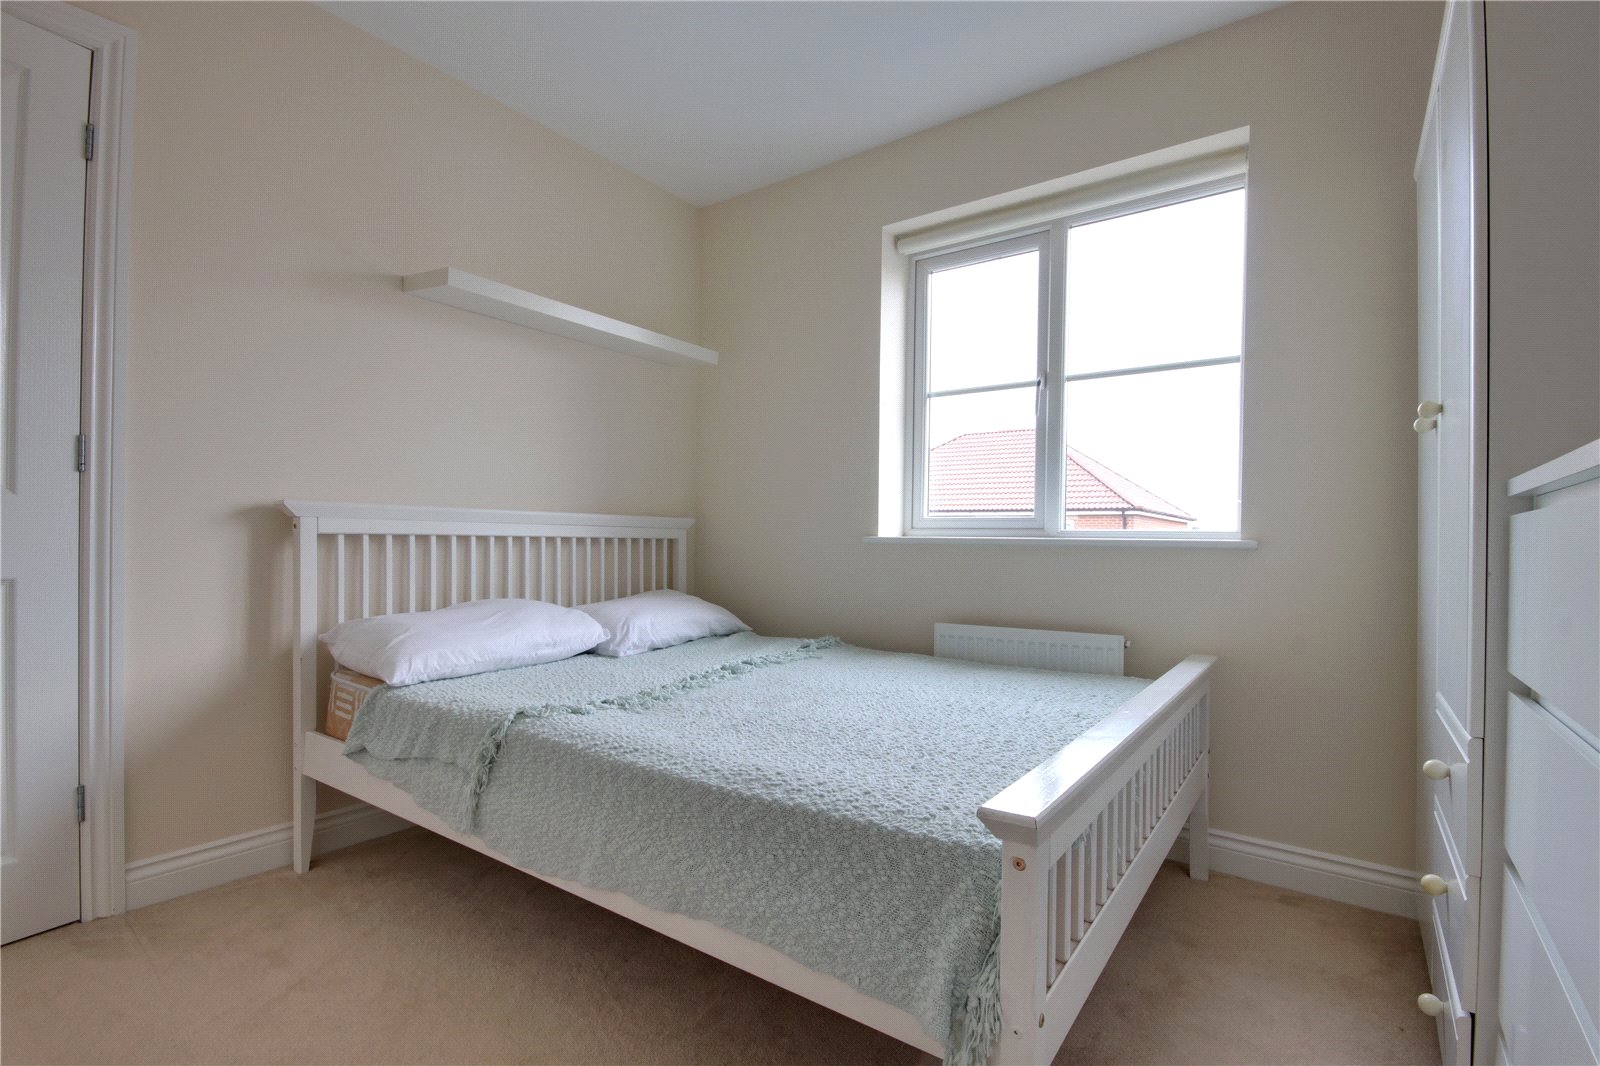 3 bed house for sale in Dorado Close, Stockton-on-Tees  - Property Image 5